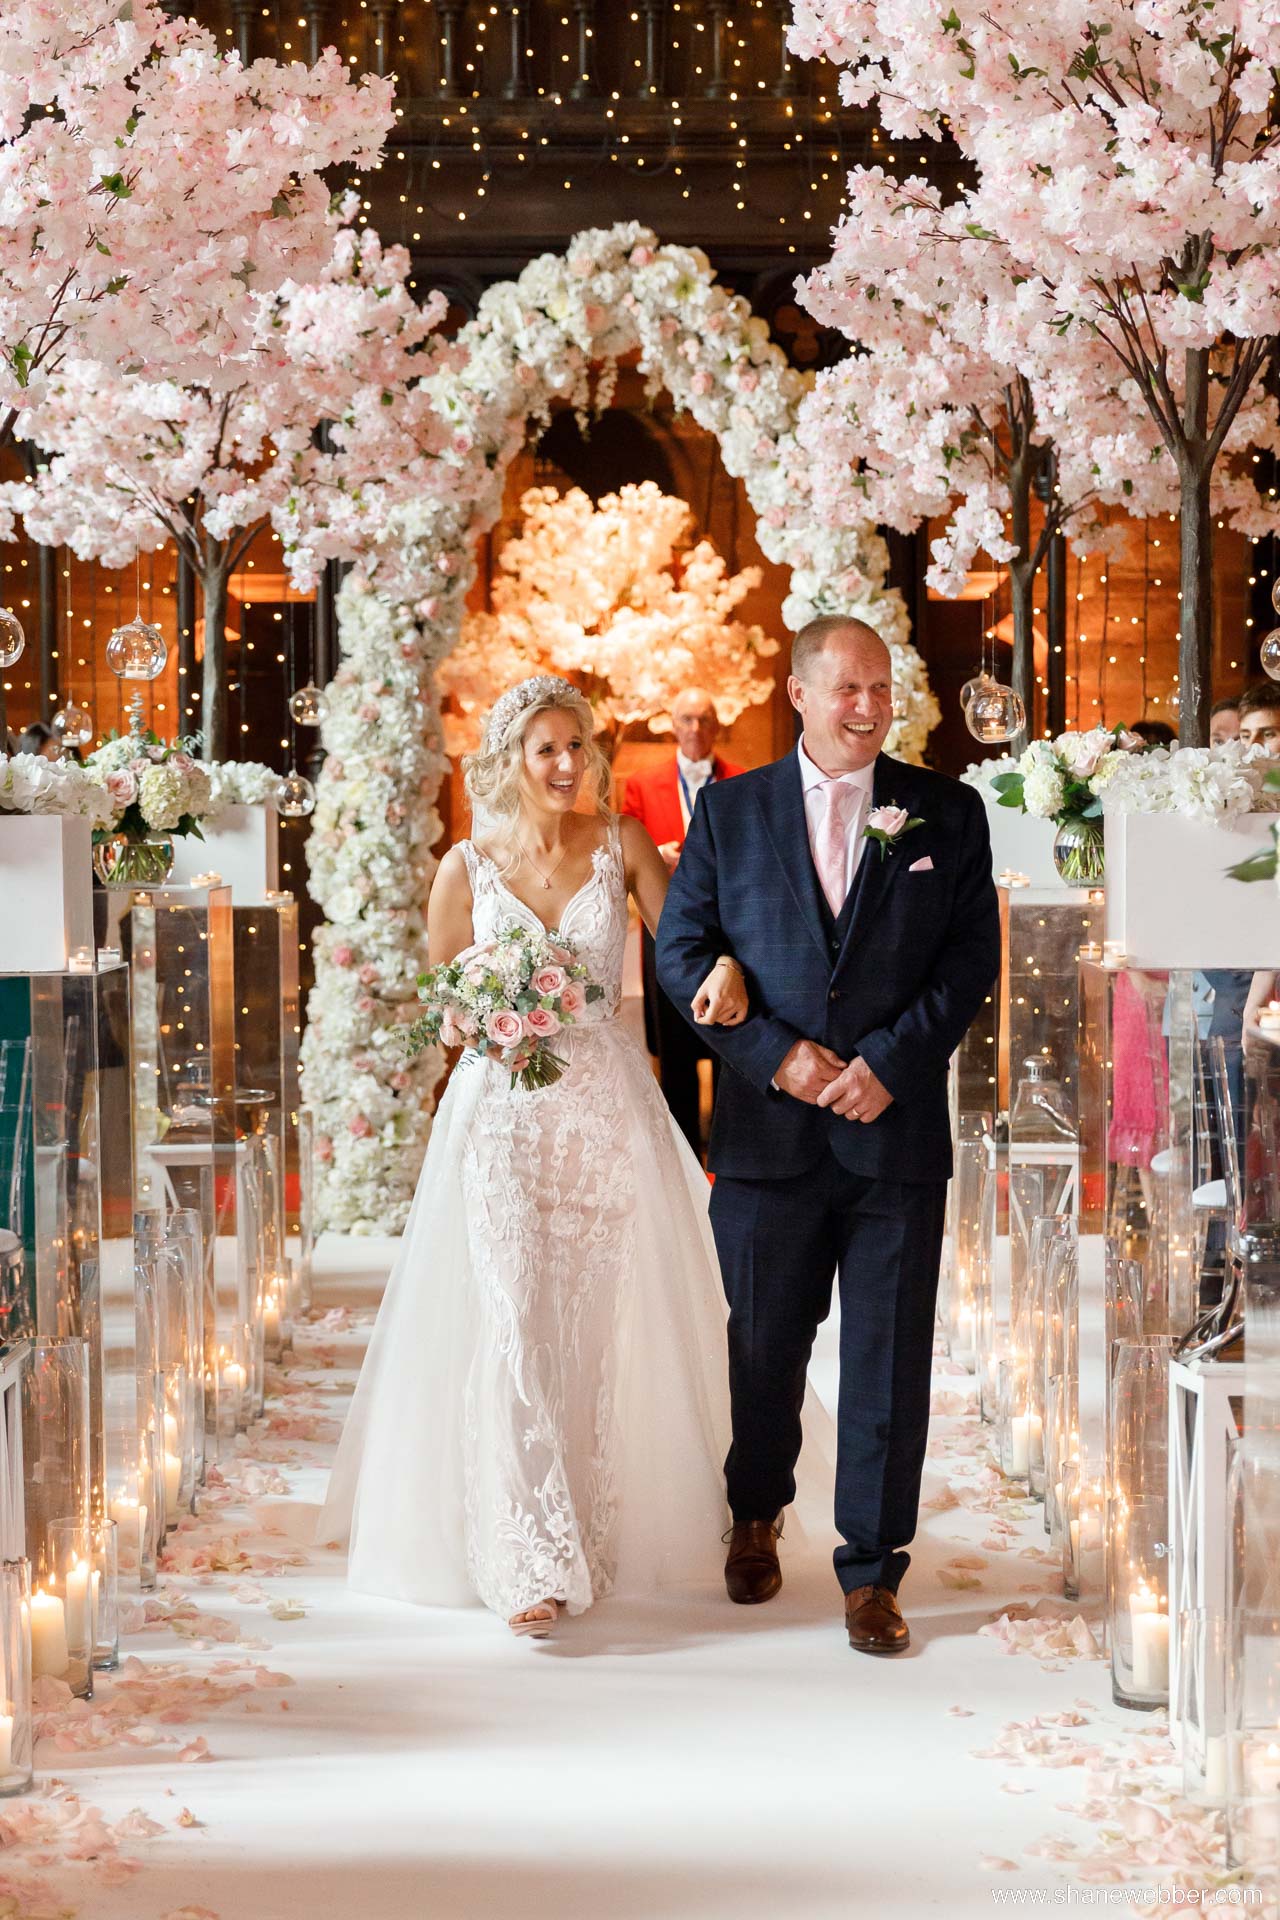 Luxury weddings at Peckforton Castle with pink blossom trees